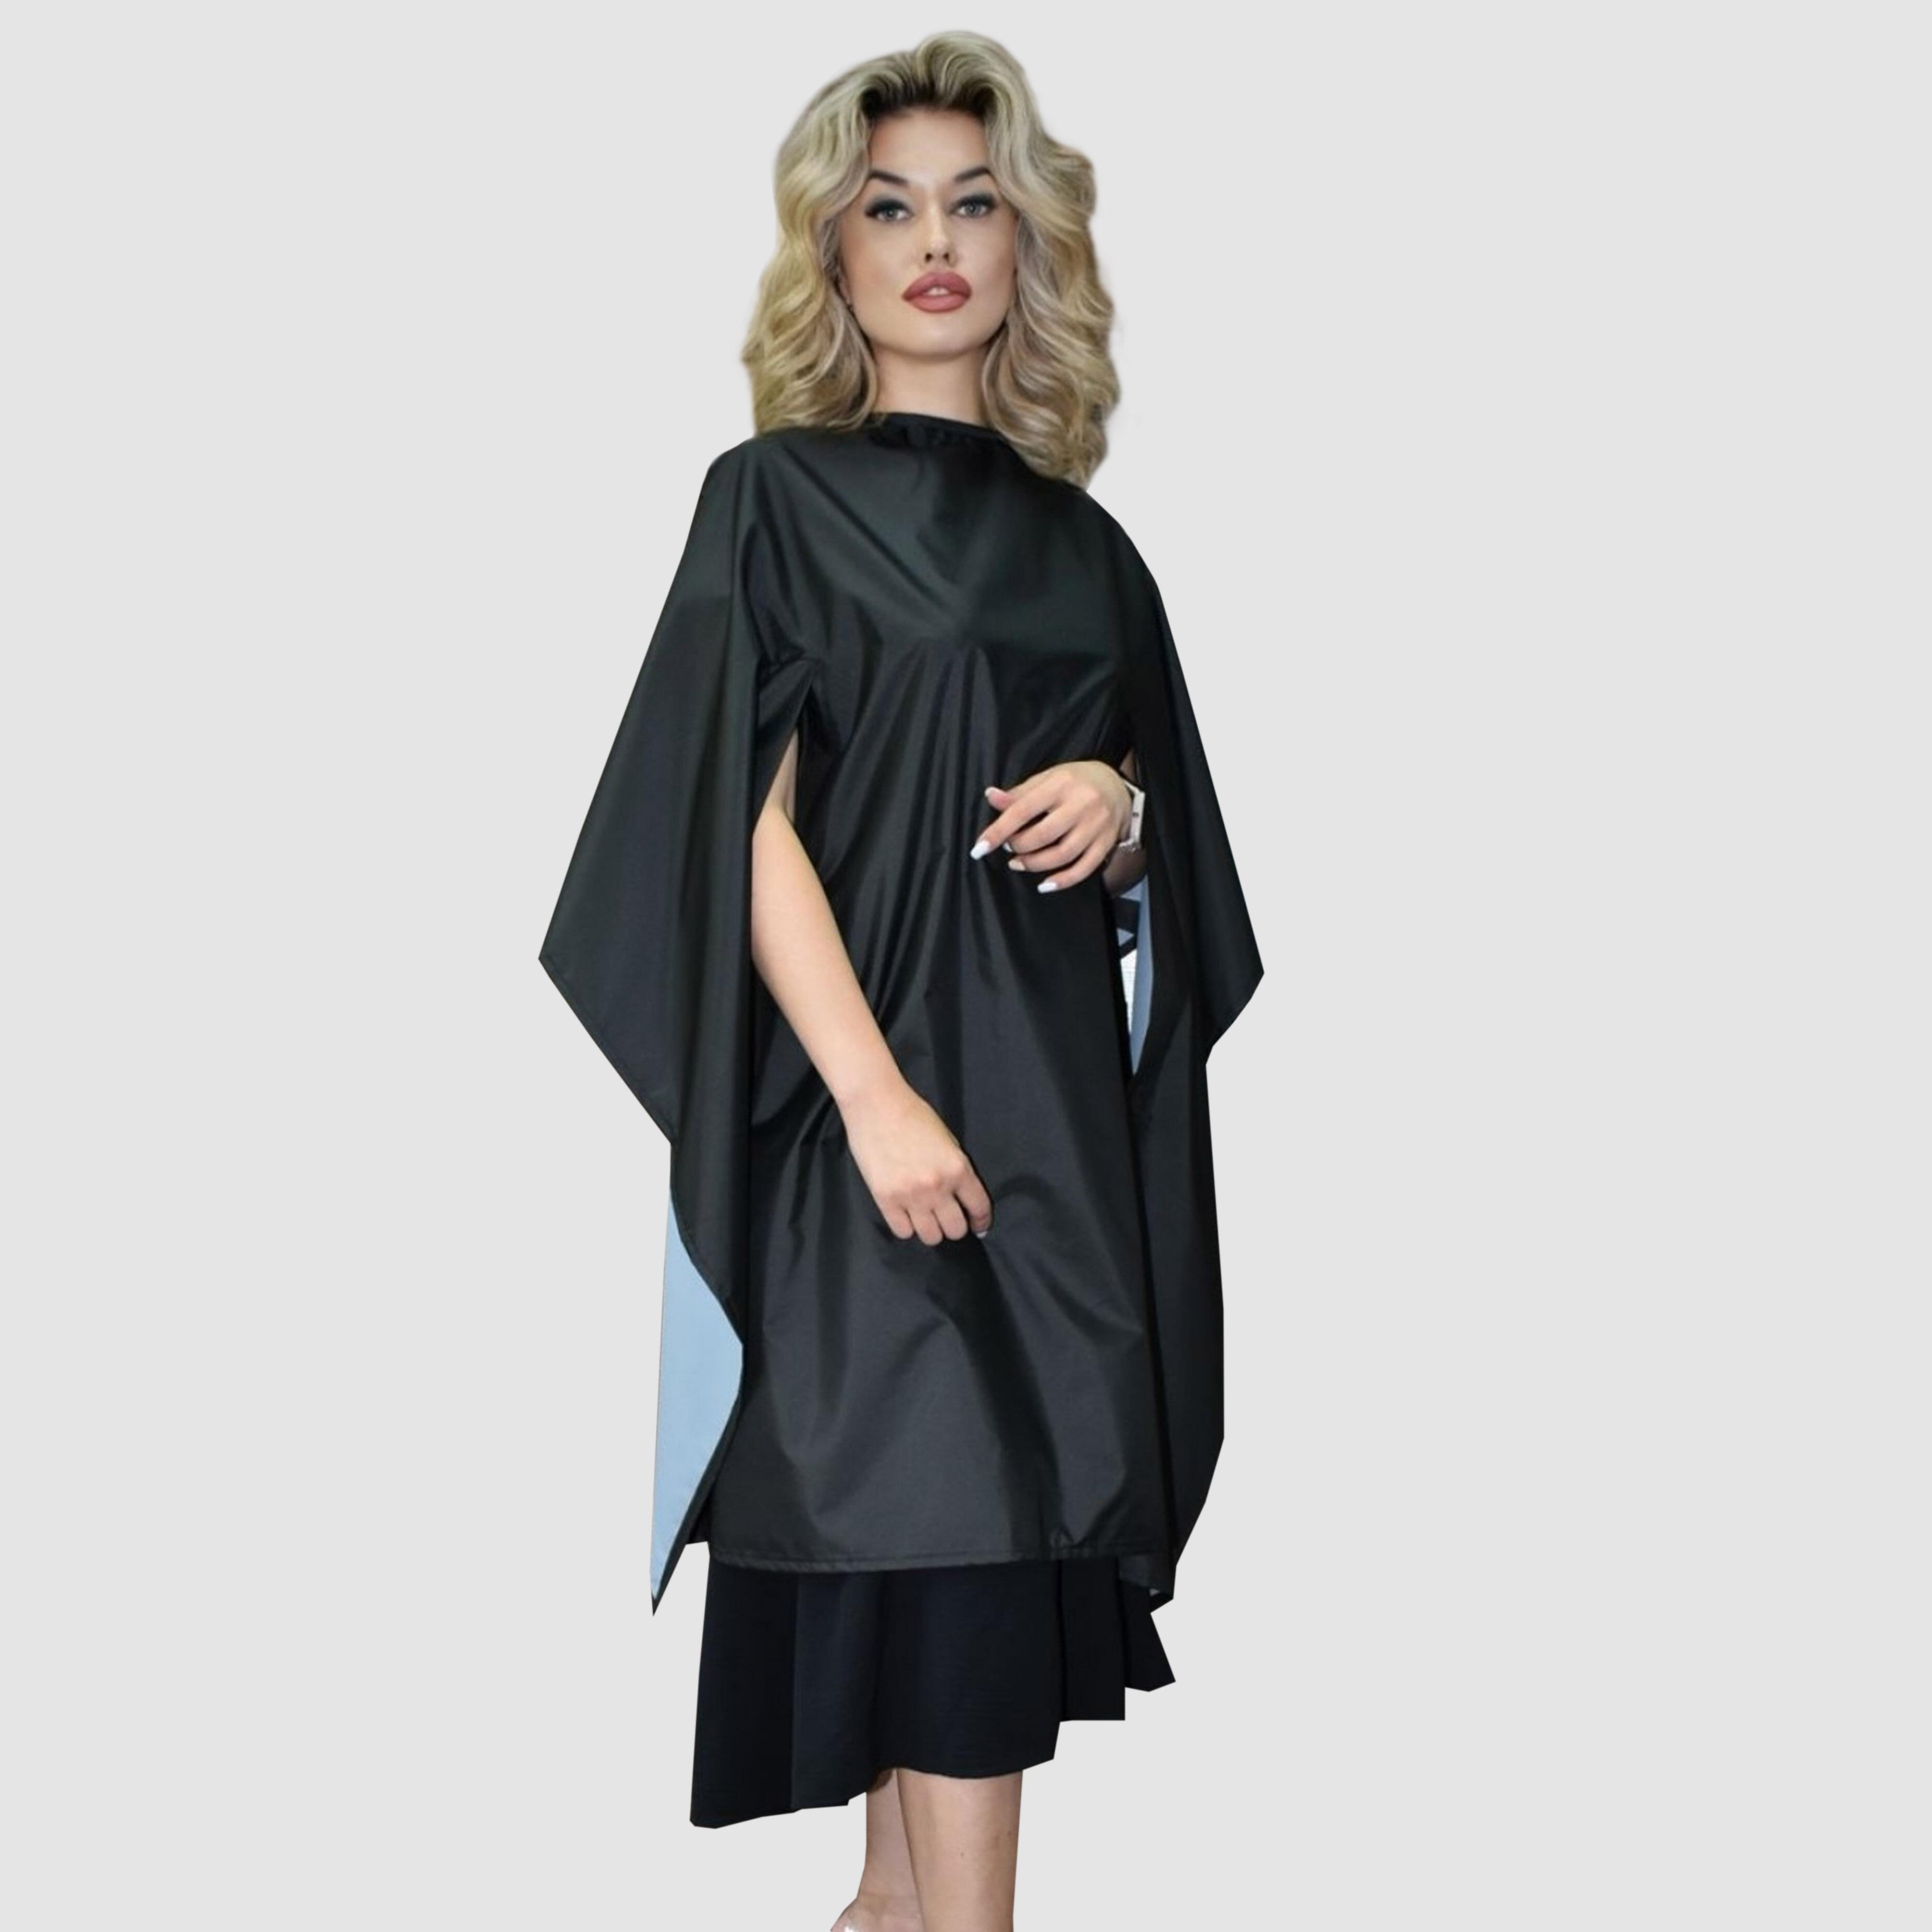 Nibano hairdressing gowns black with handsplits